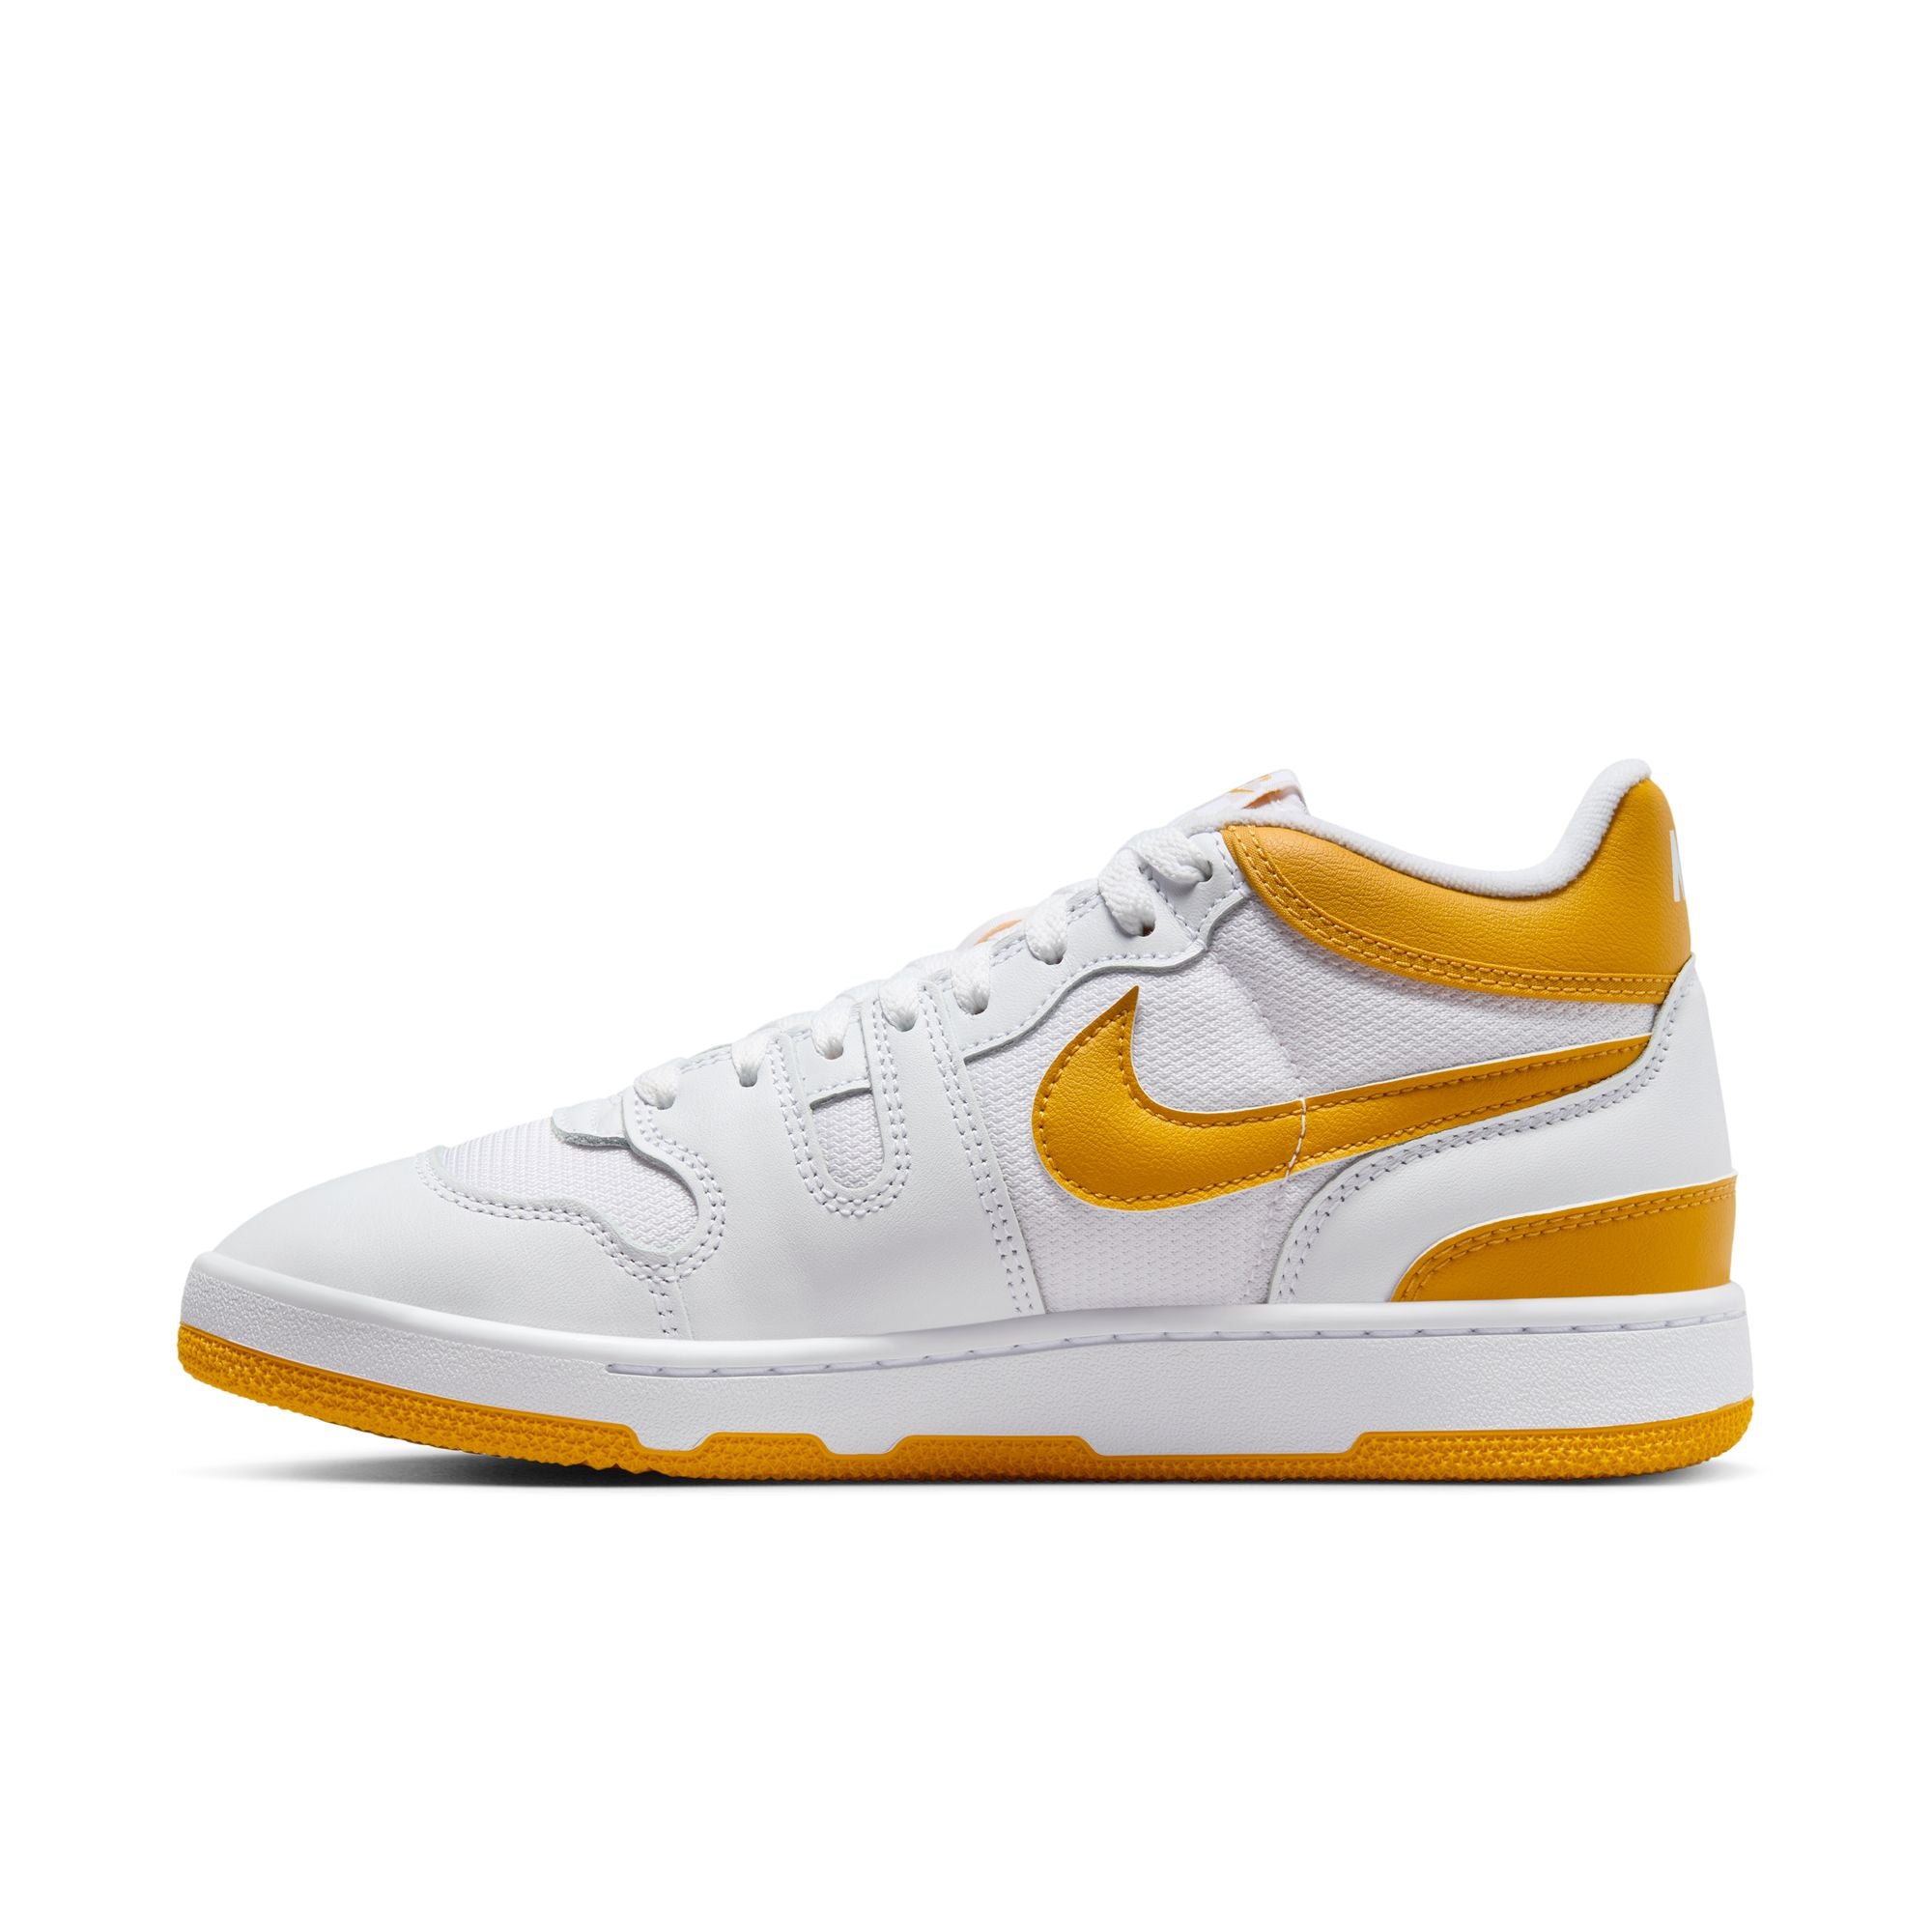 Nike Attack QS SP